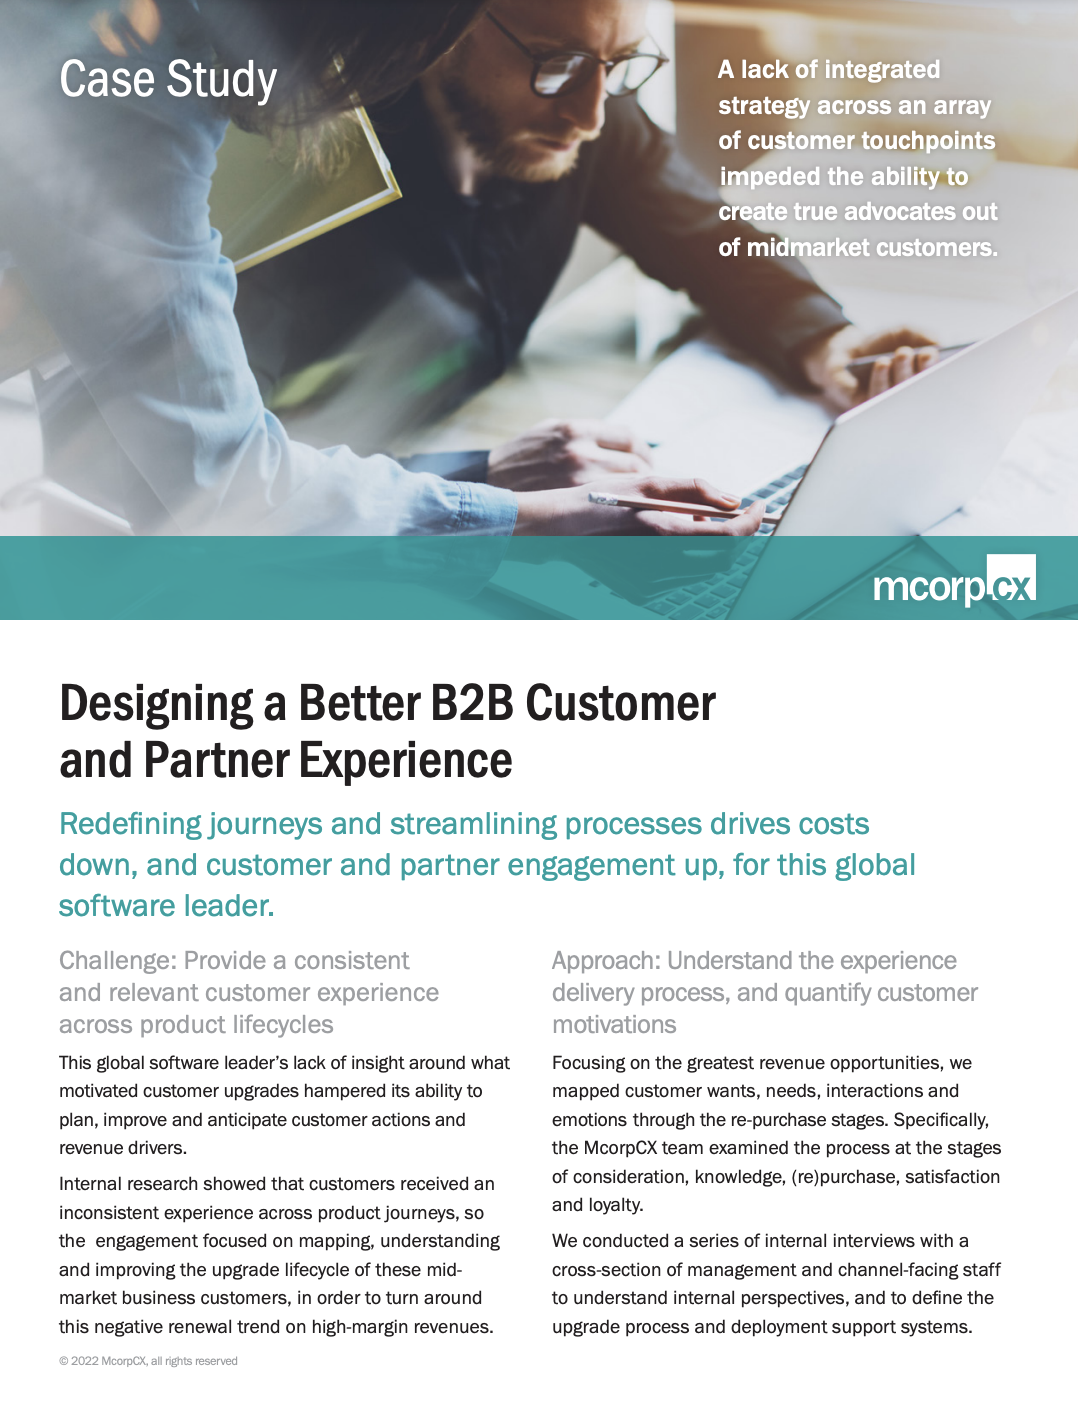 Designing a Better B2B Customer and Partner Experience